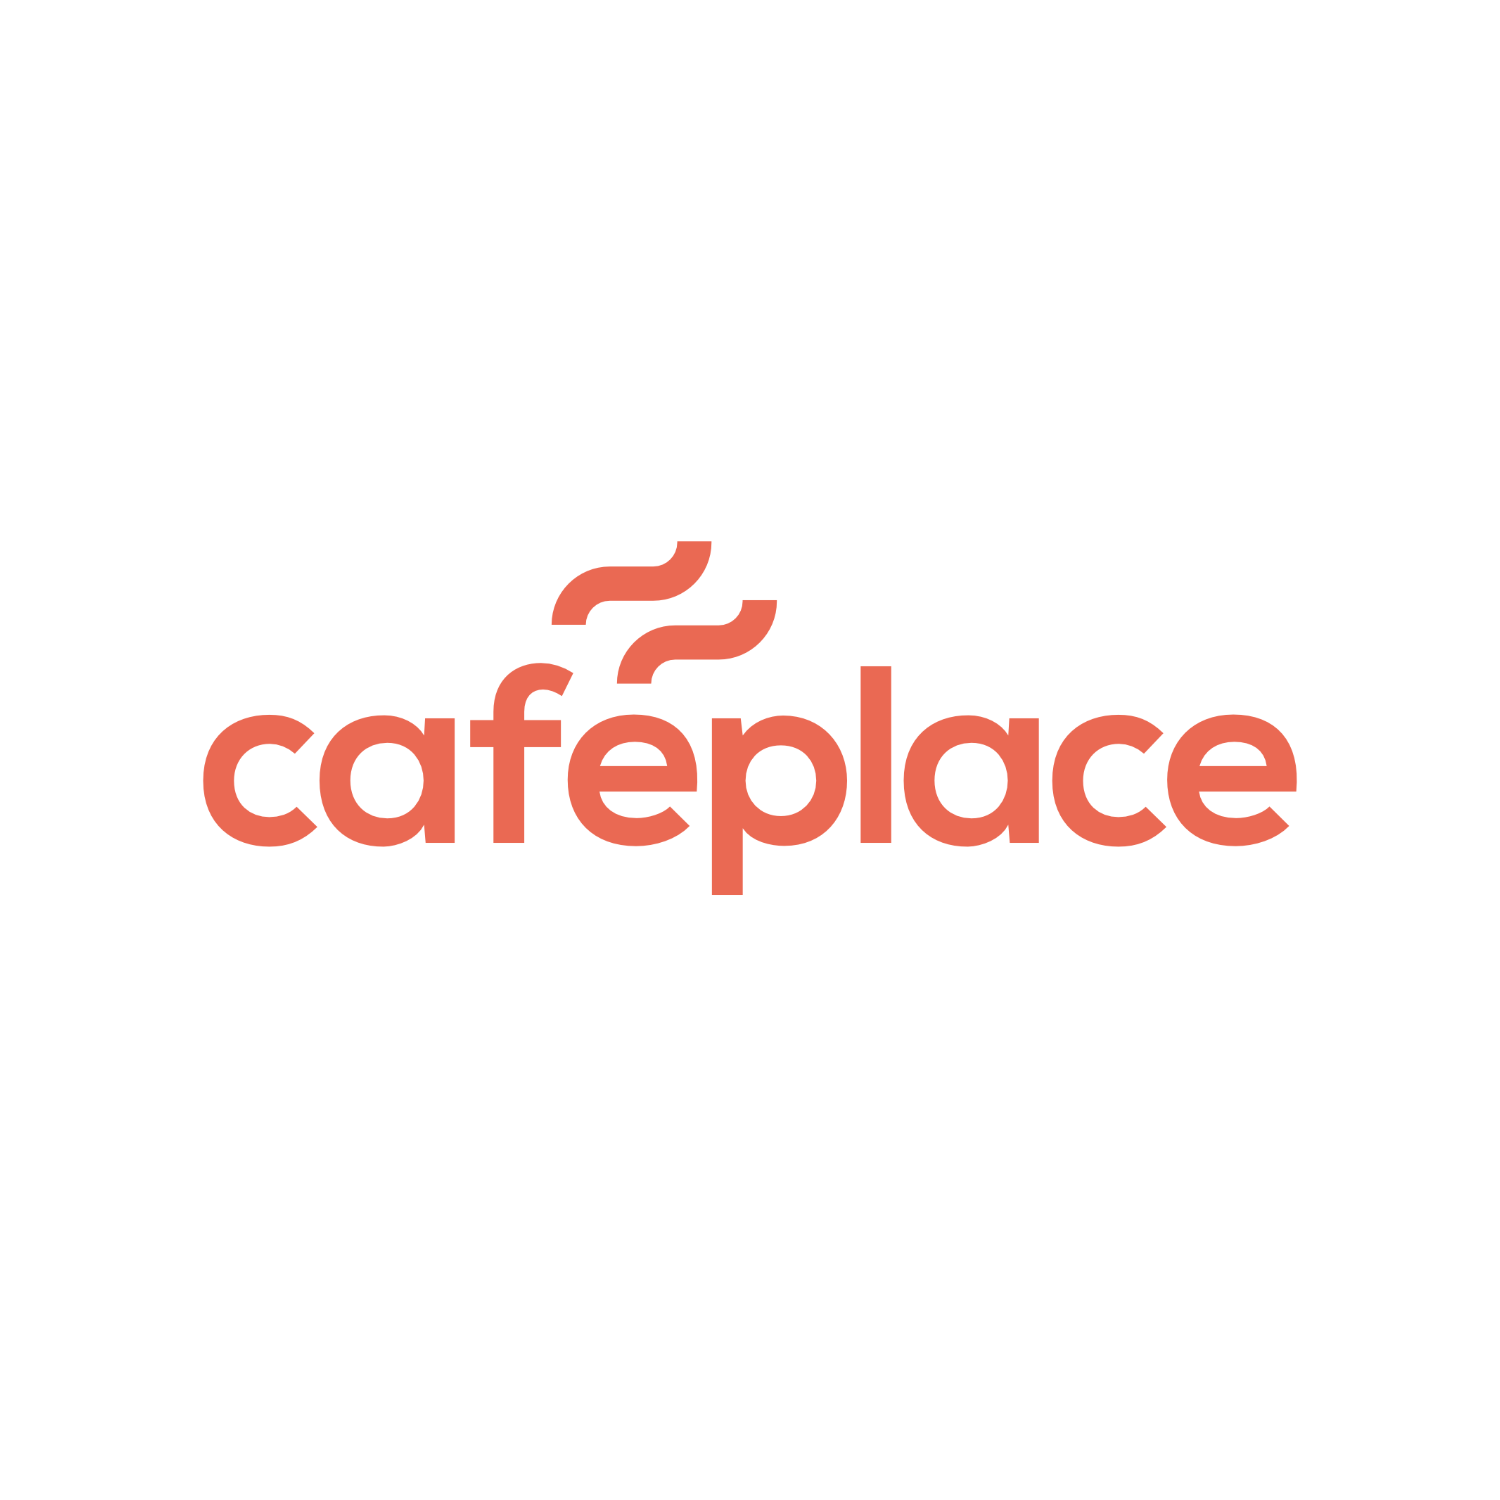 cafeplace